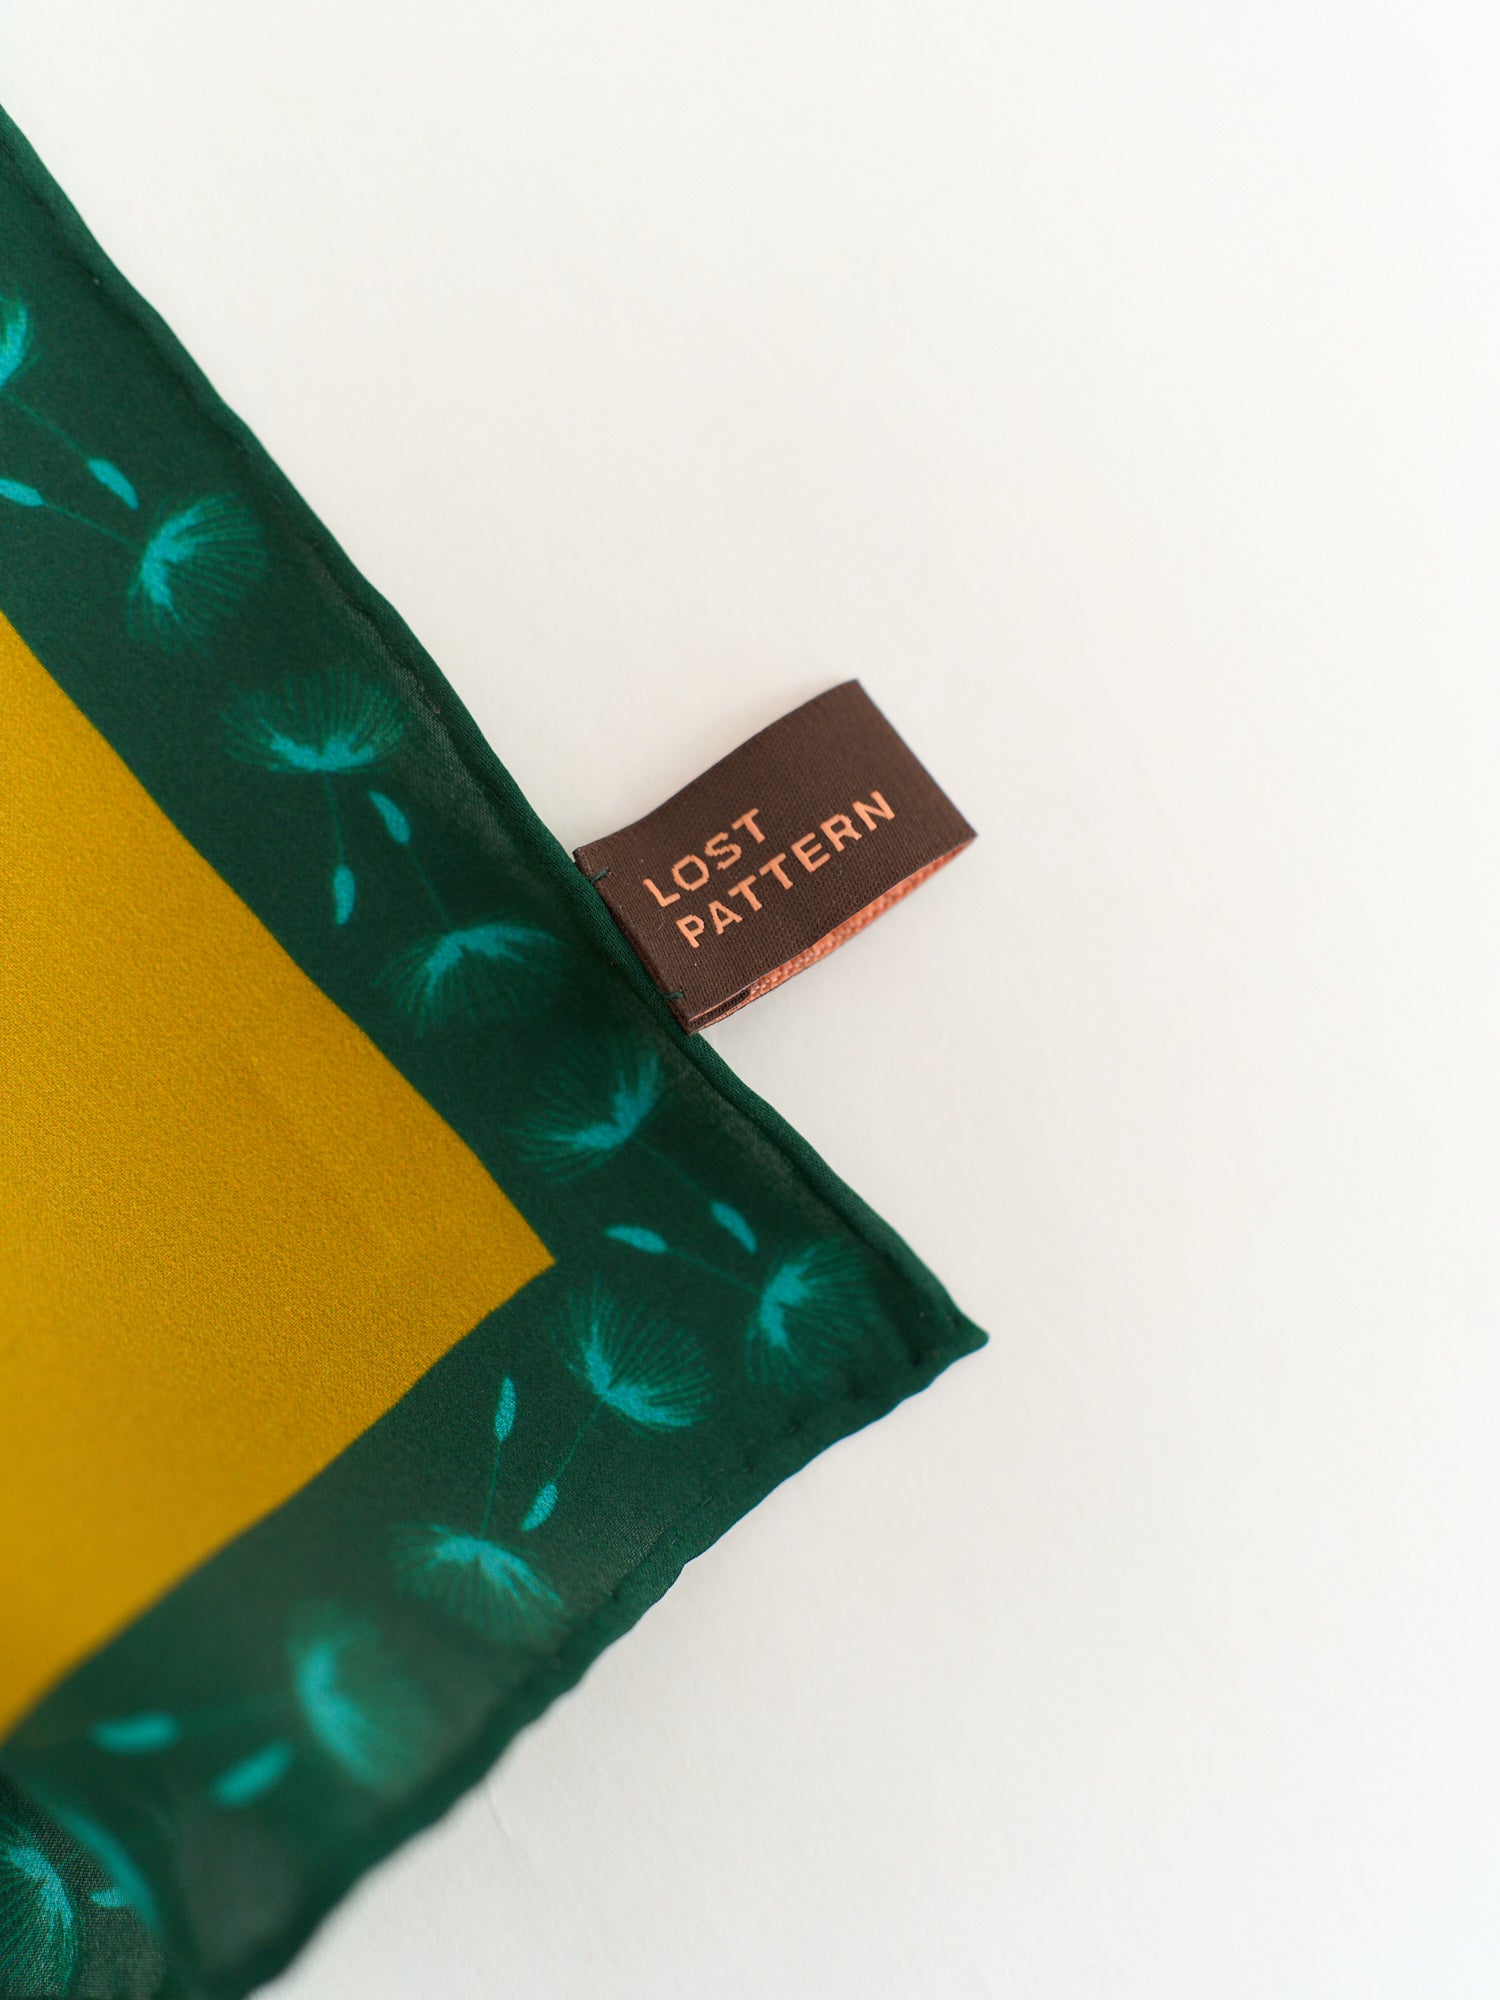 "The Trophy" Silk Scarf for Socially Relevant Film Festival NY - LOST PATTERN Silk Square Scarf